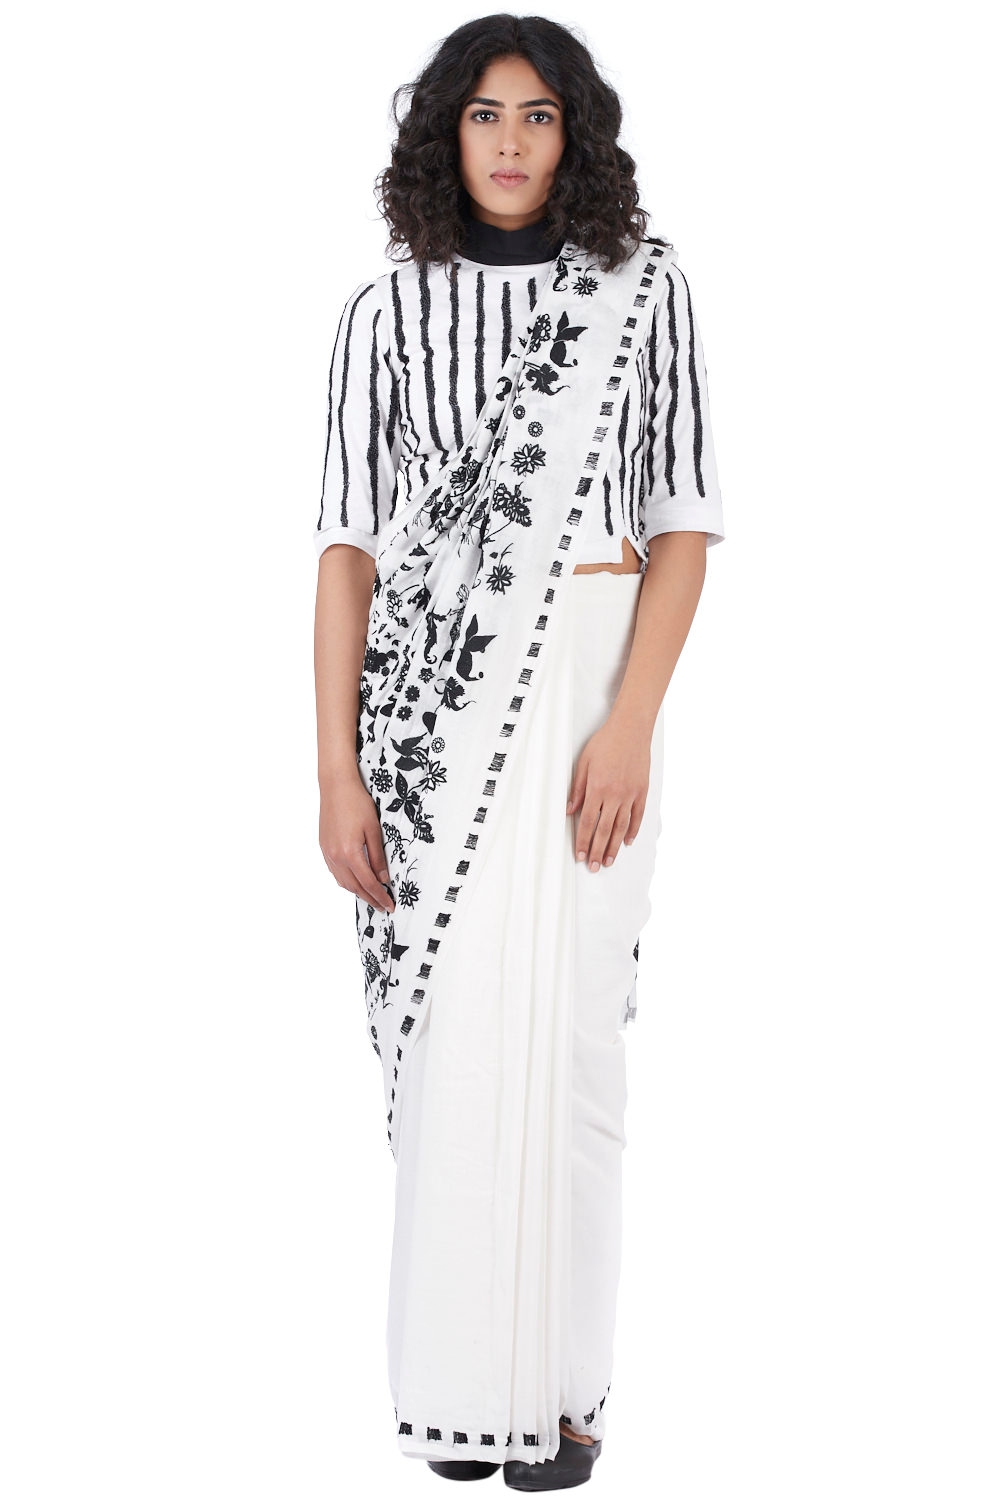 ABRAHAM AND THAKORE | Embroidered Floral Chanderi Saree